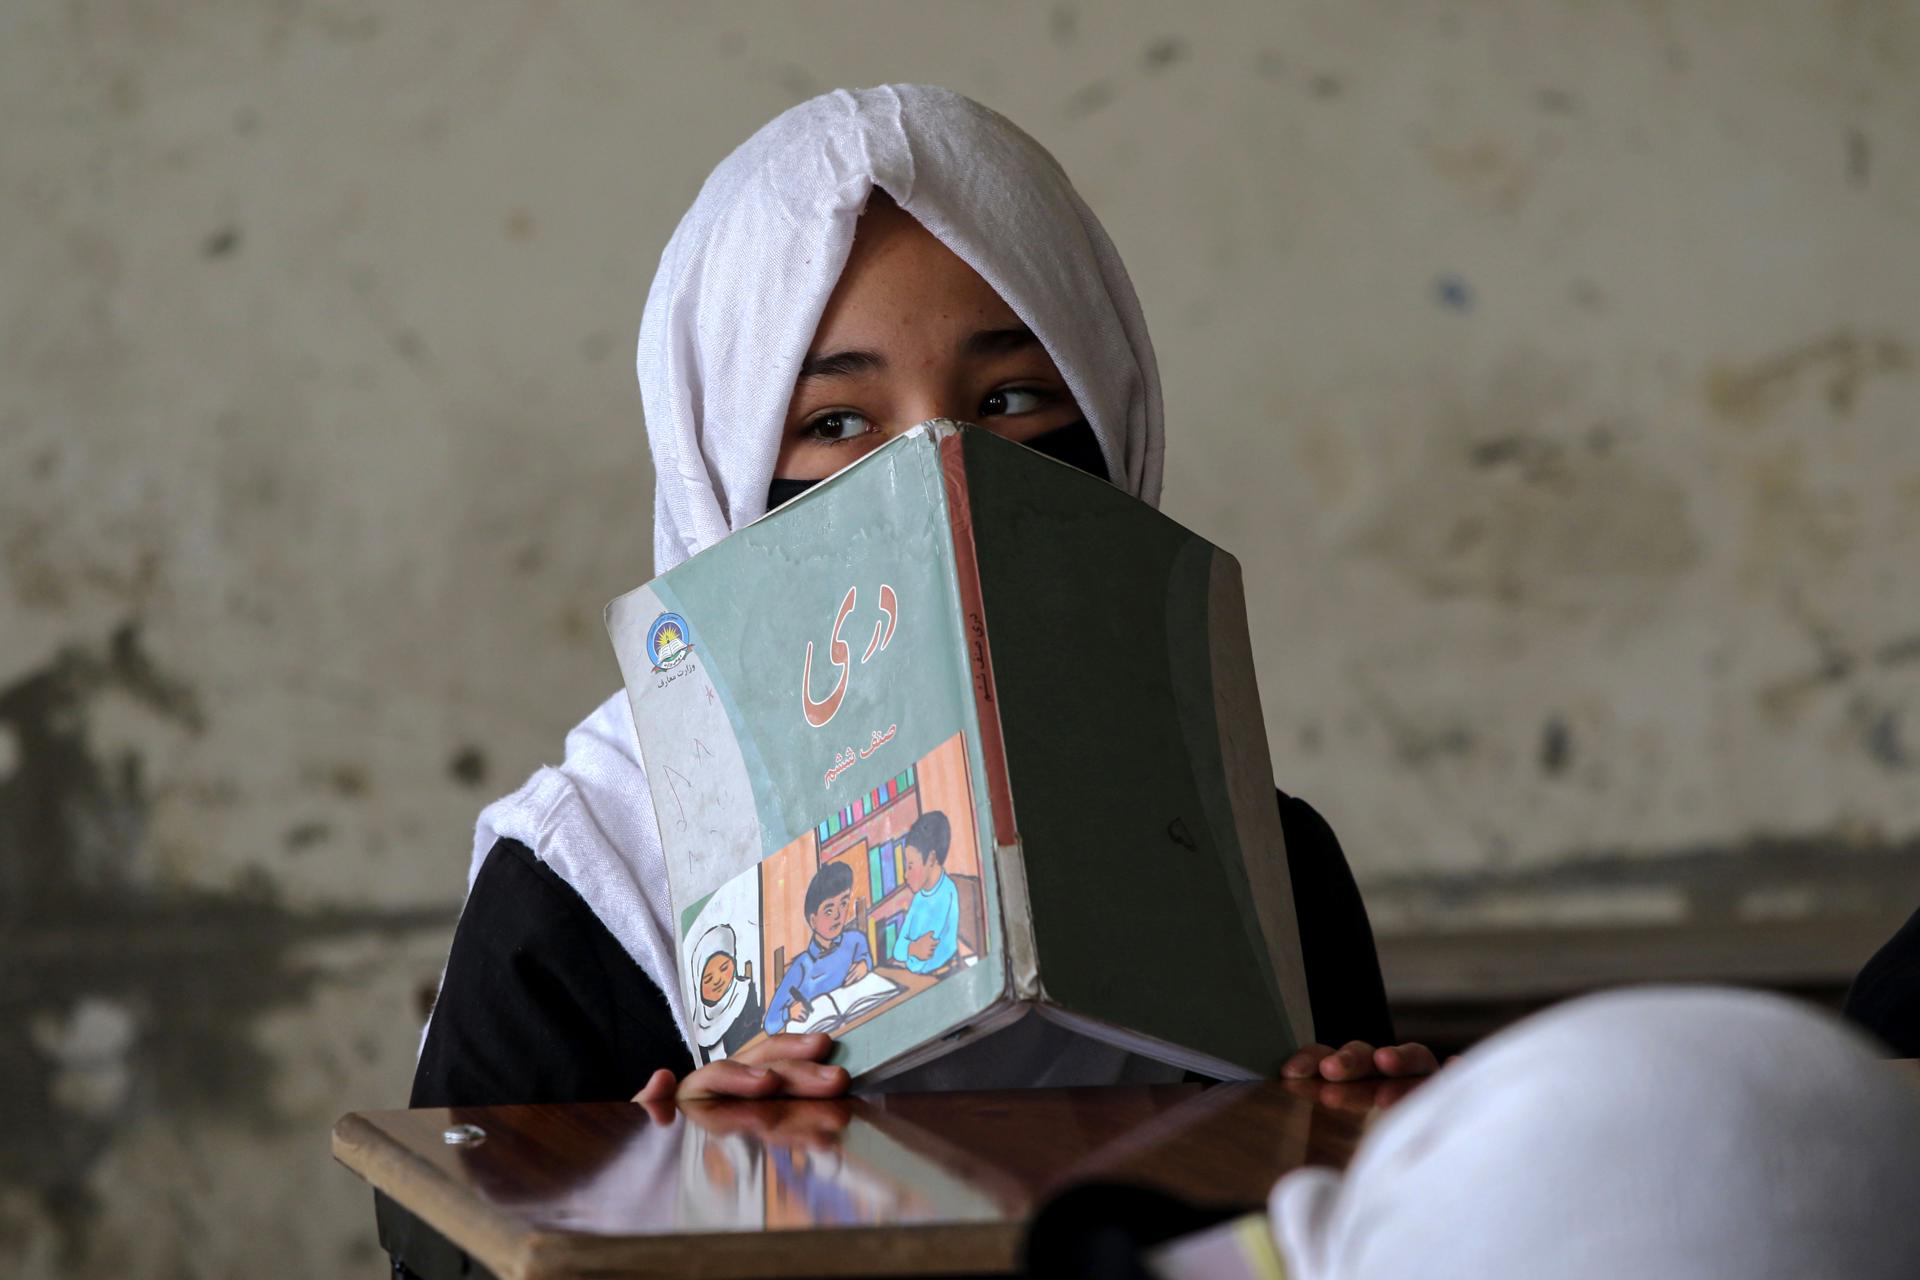 A schoolgirl attending up to primary grade classes sits in a classroom at the start of the new academic year in Kabul, Afghanistan, 25 March 2023. EFE-EPAFILE/SAMIULLAH POPAL